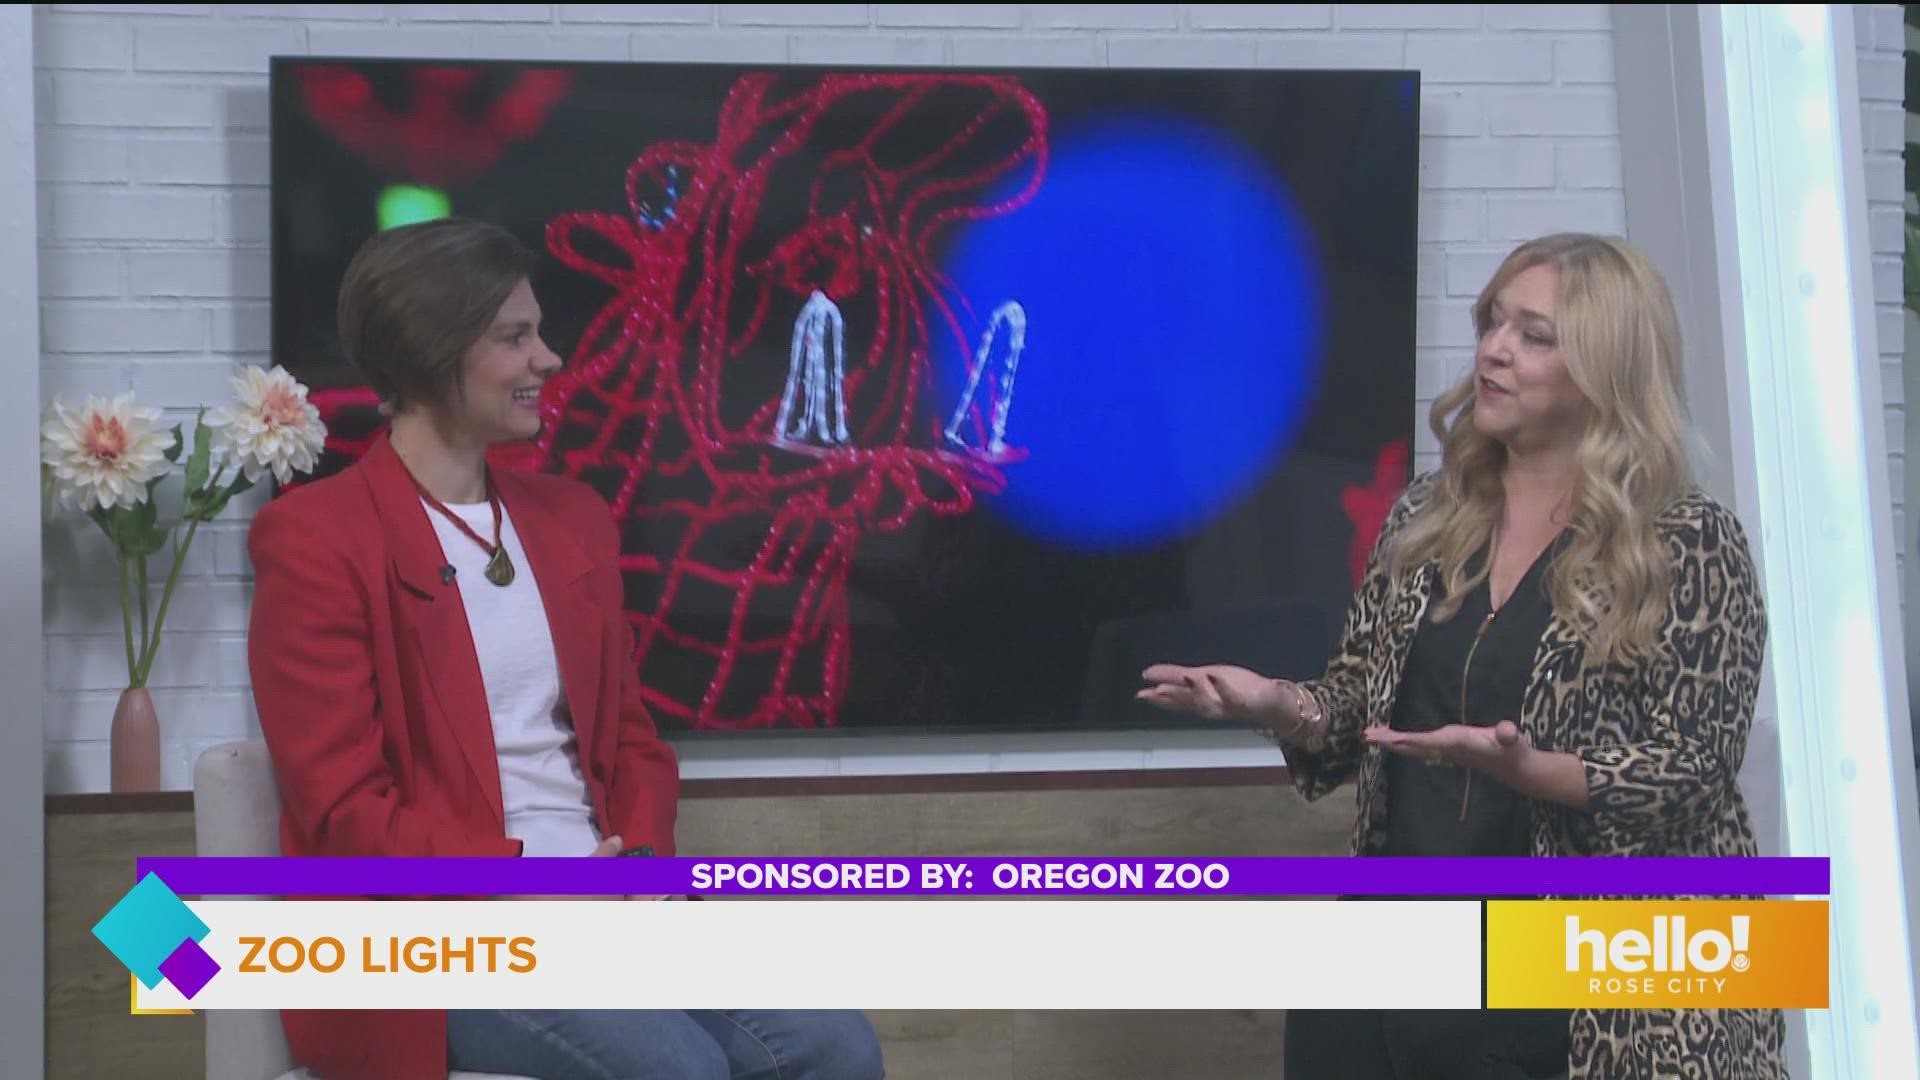 This segment is sponsored by the Oregon Zoo